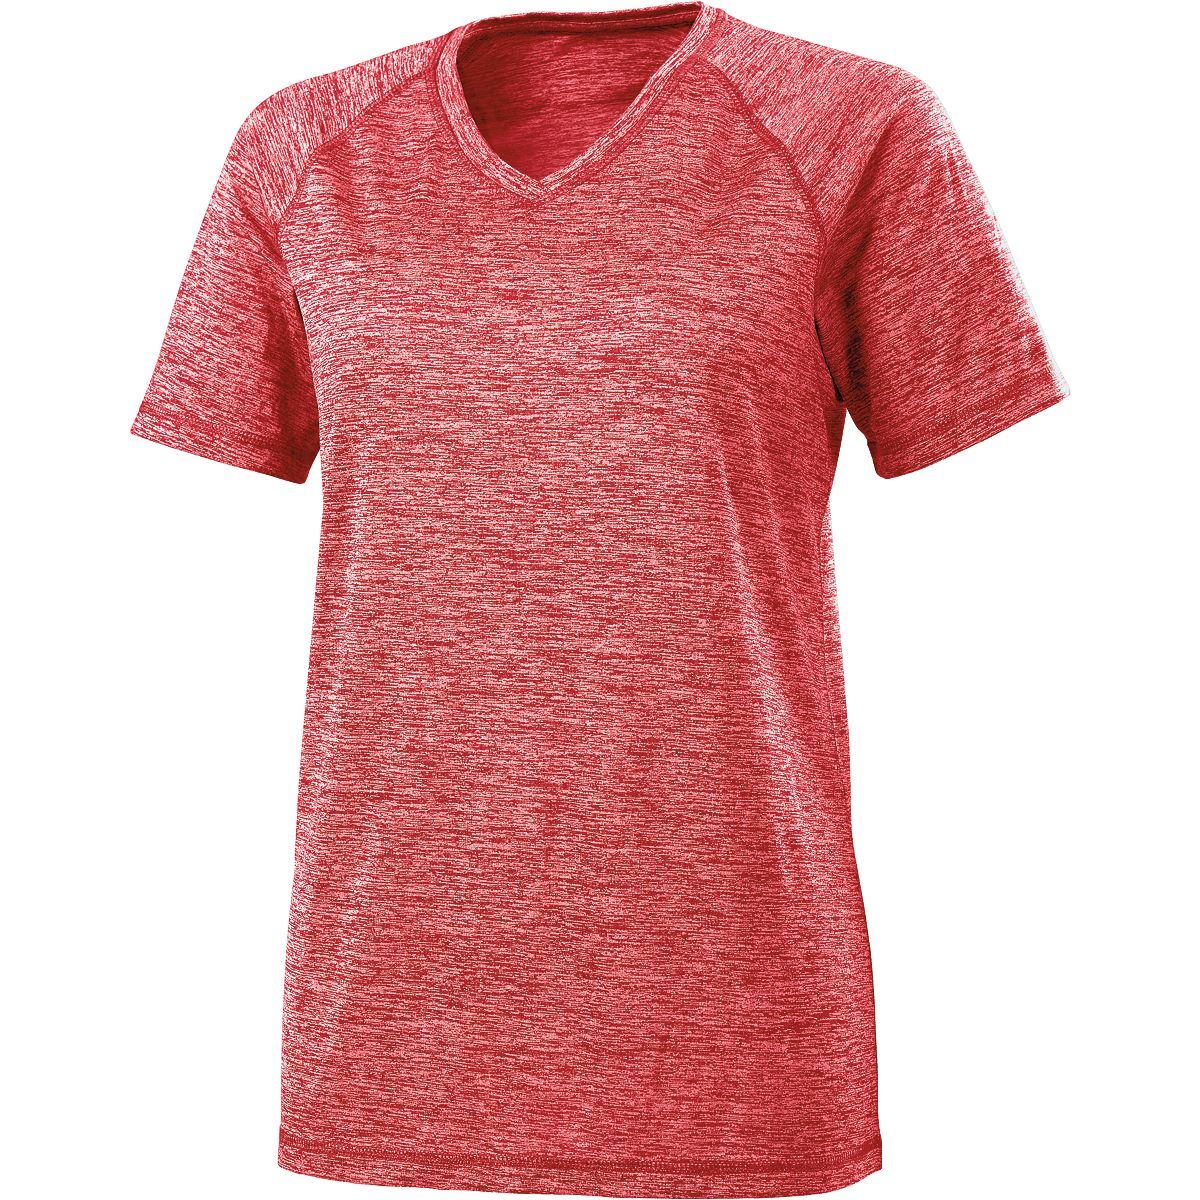 Holloway Ladies Electrify 2.0  Short Sleeve Shirt V-Neck in Scarlet Heather  -Part of the Ladies, Holloway, Shirts product lines at KanaleyCreations.com